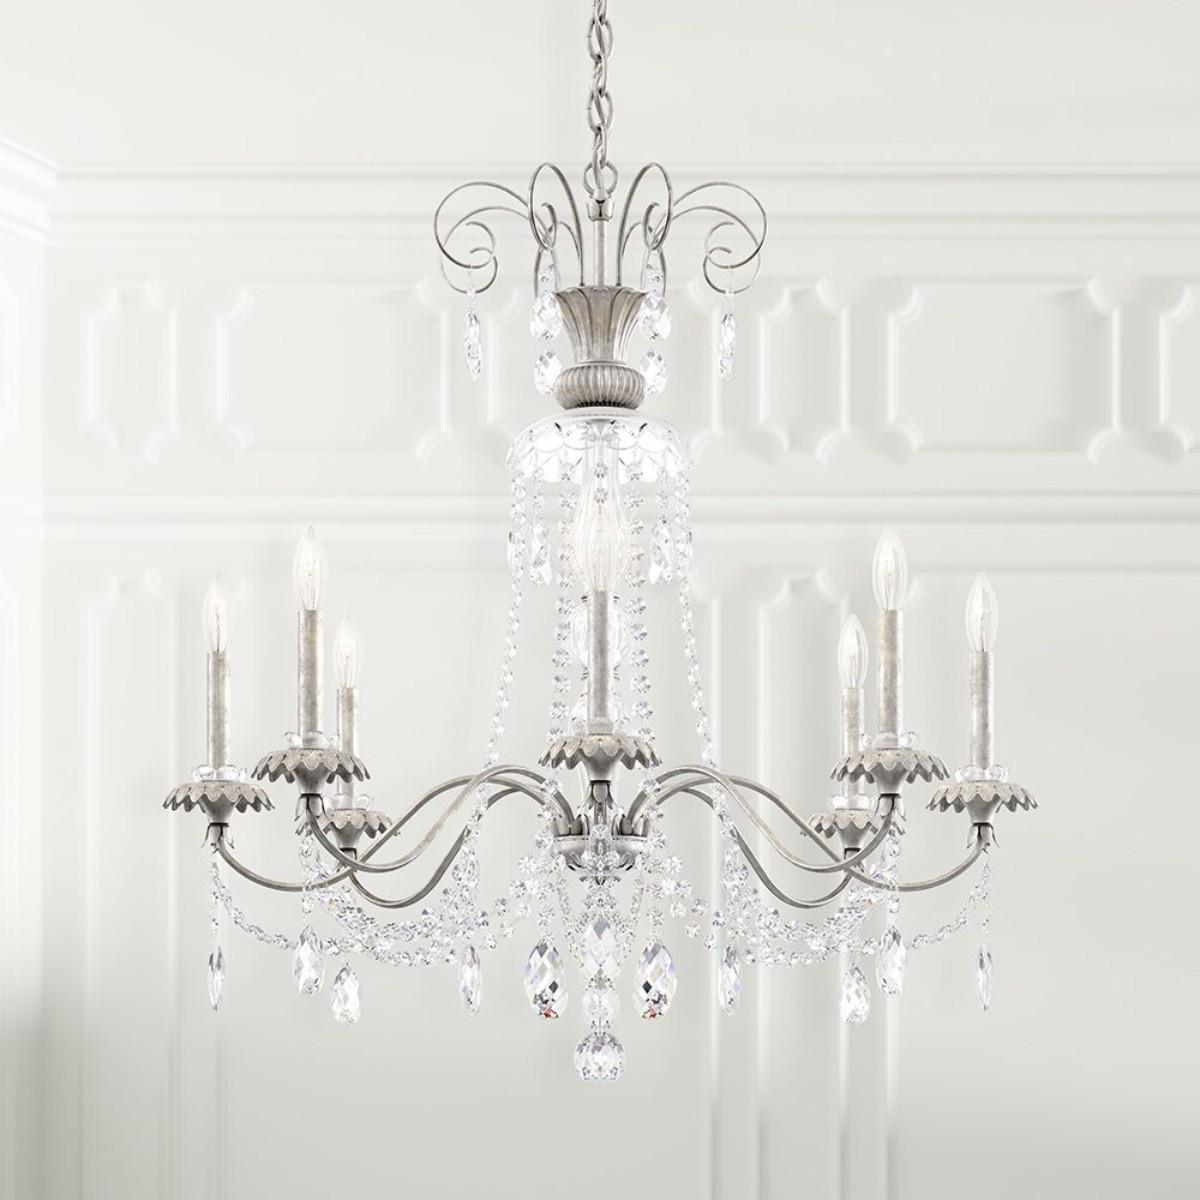 Helenia 8 Light Chandelier with Clear Heritage Crystals - Bees Lighting